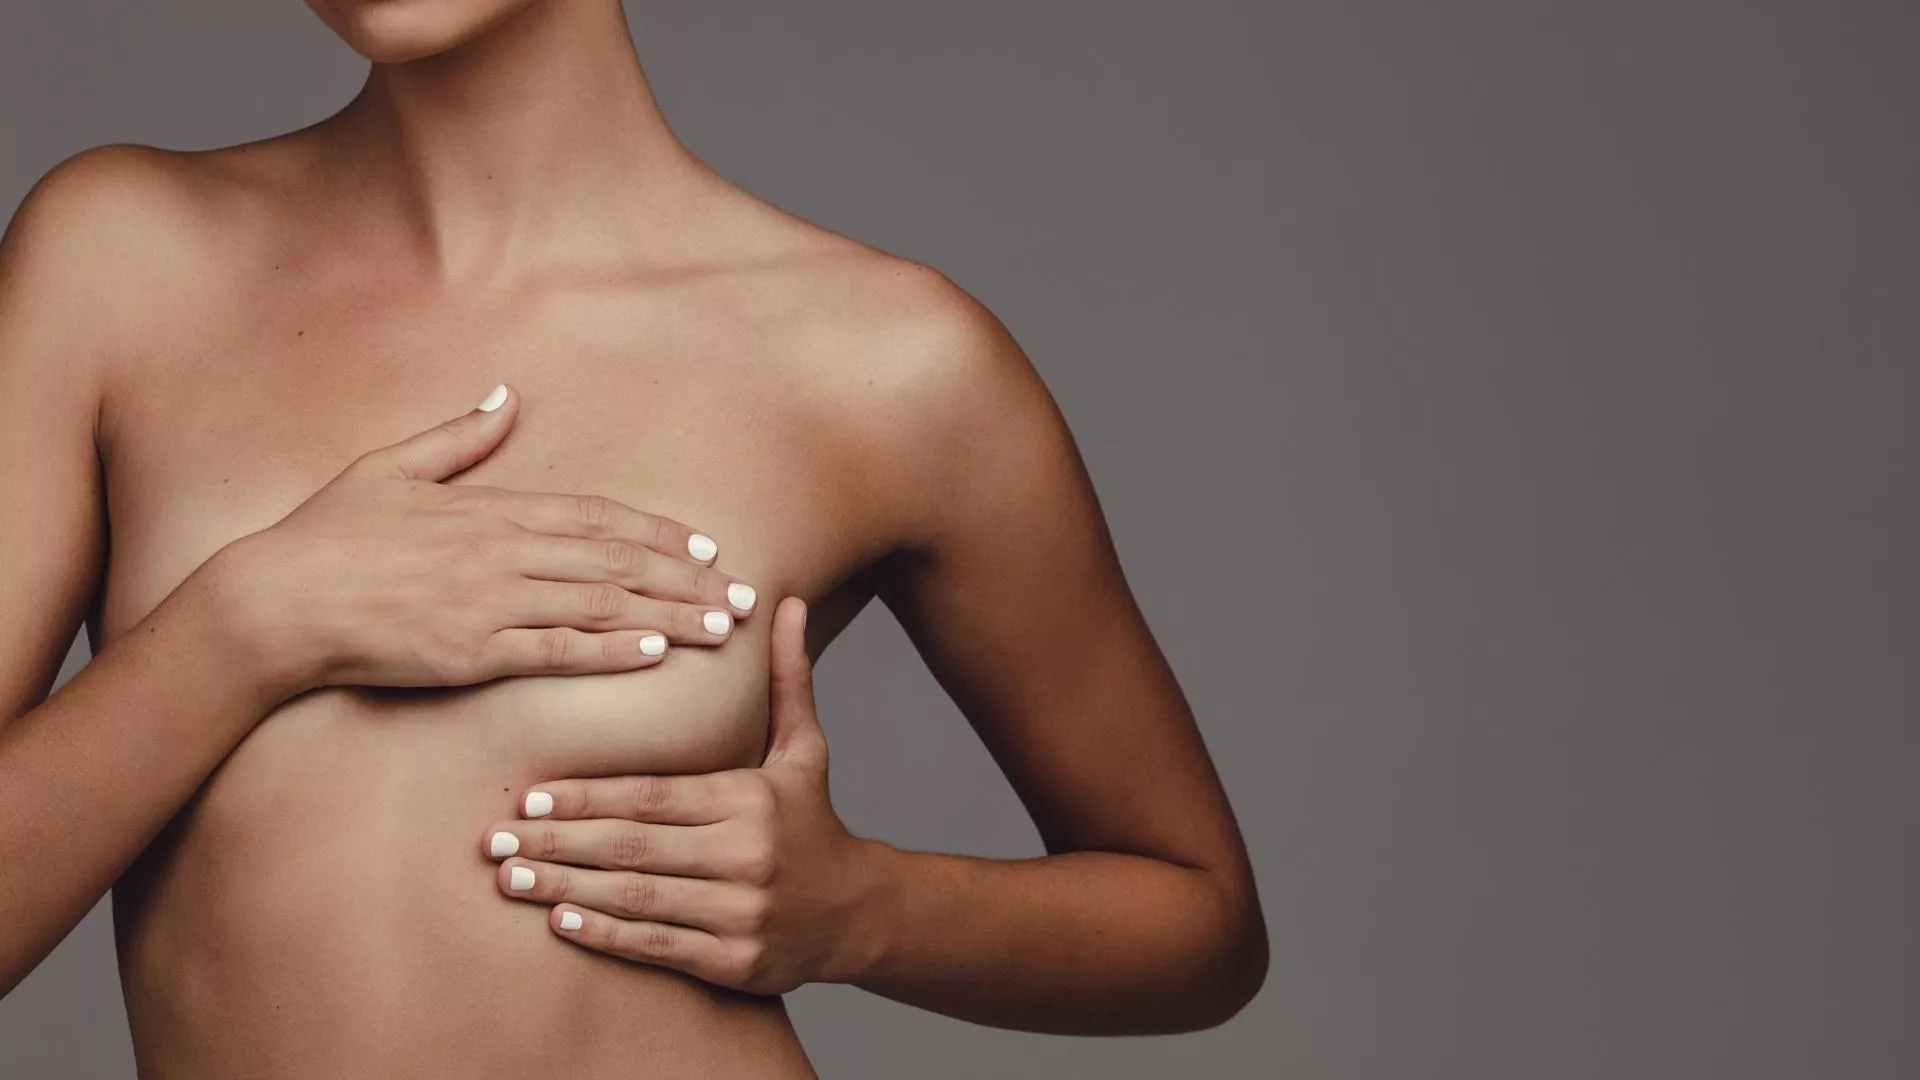 How Does Breast Cancer Spread?